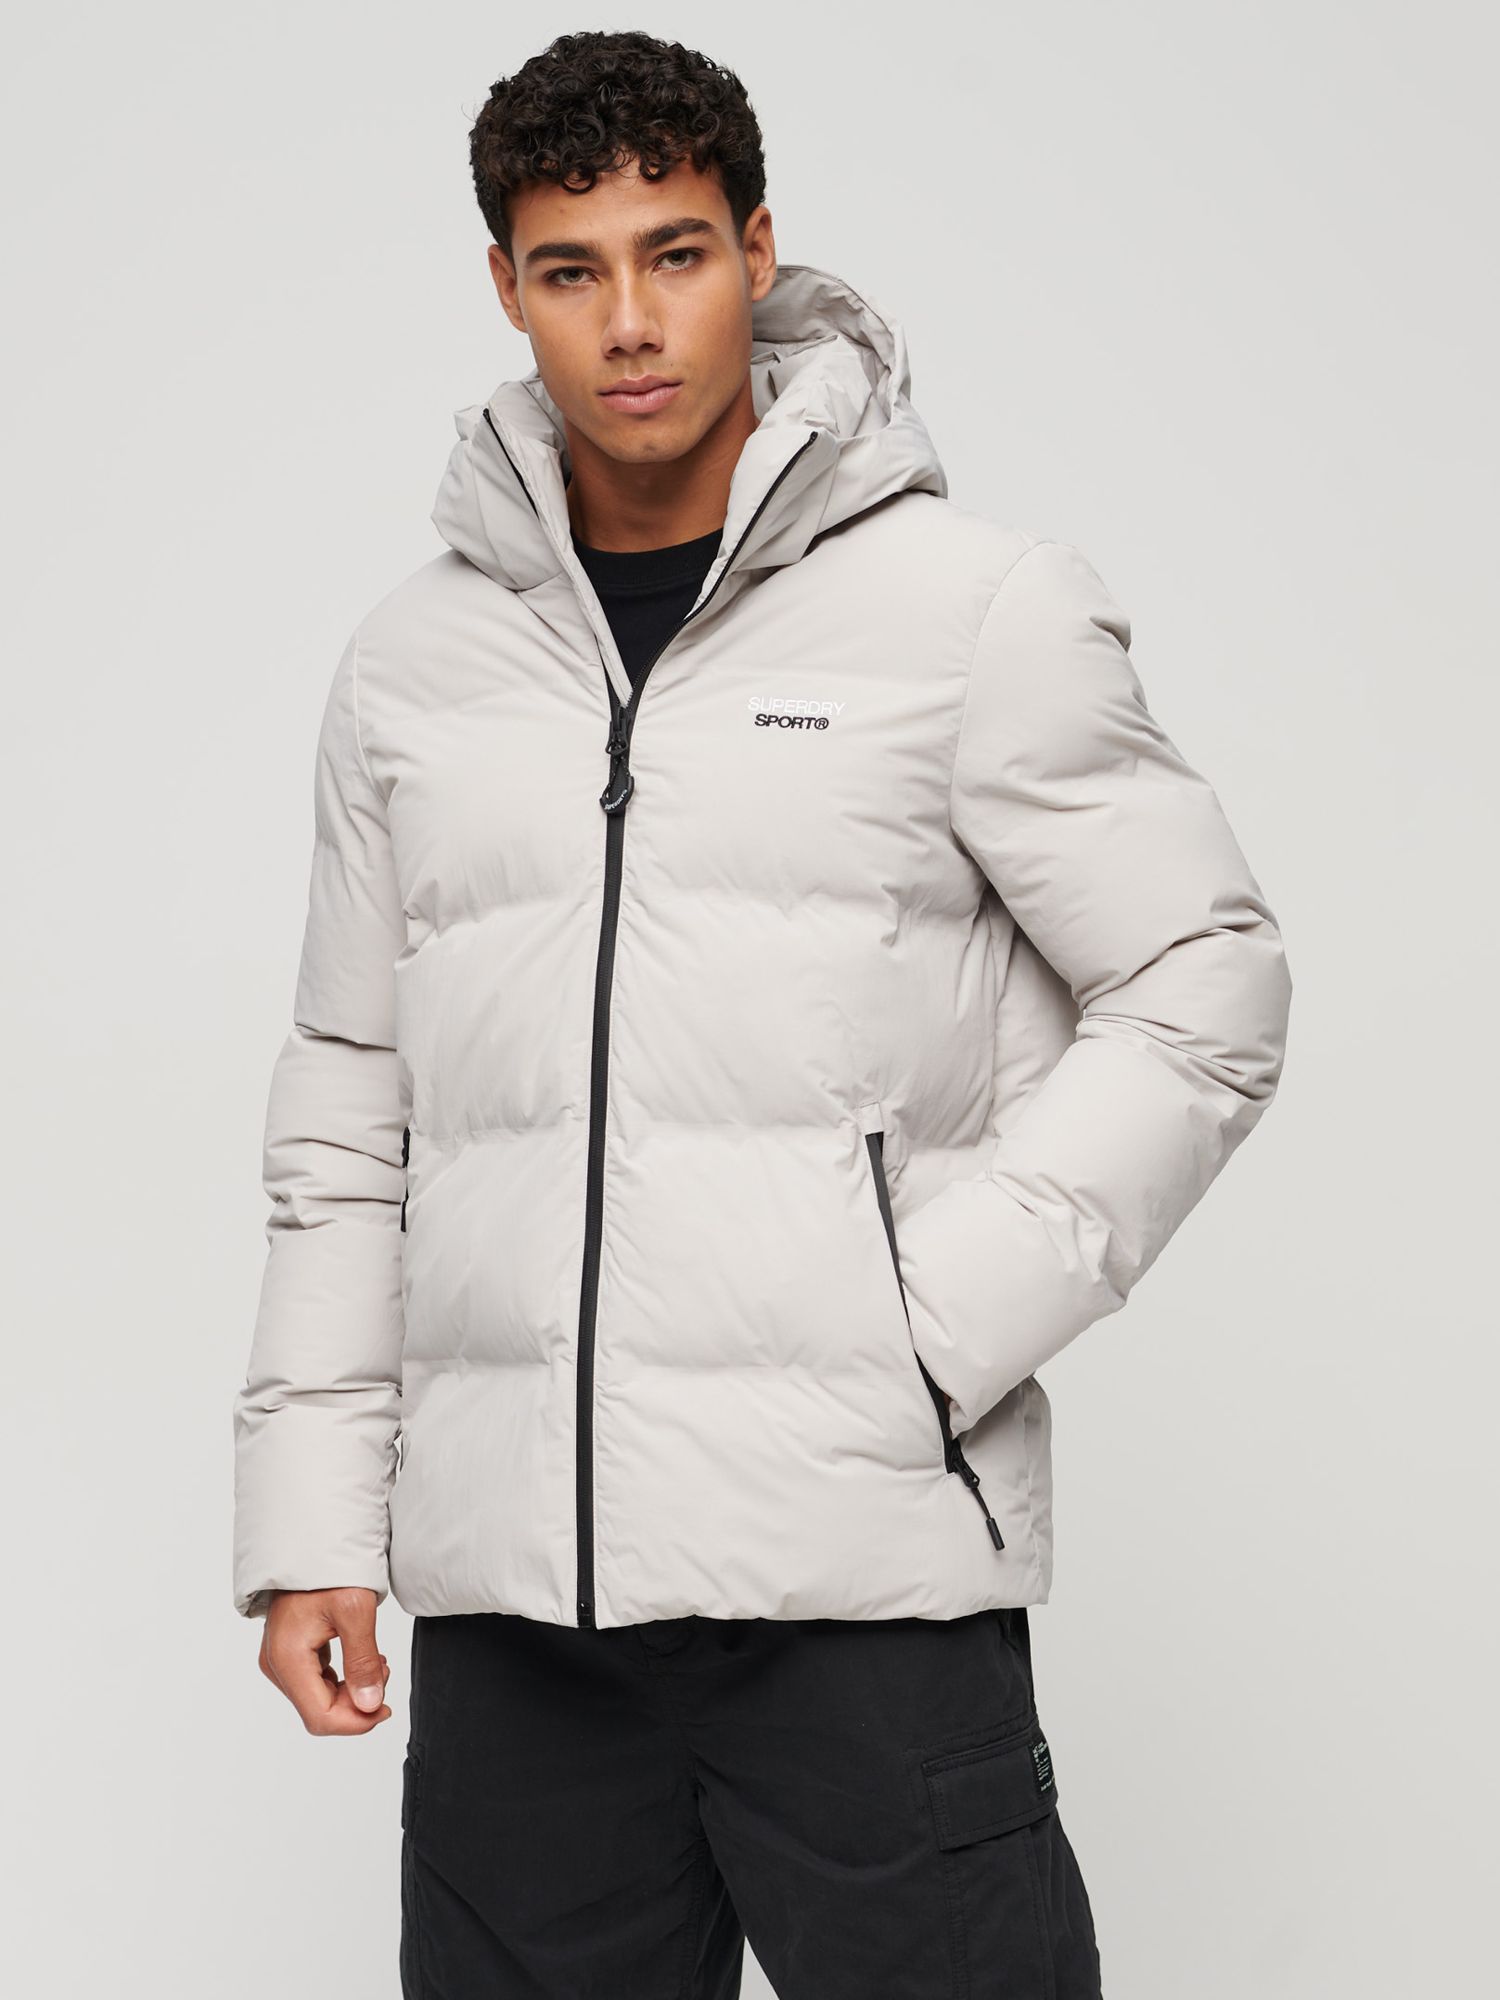 Superdry Hooded John Moonlight at Jacket, Lewis Grey Puffer Boxy & Partners